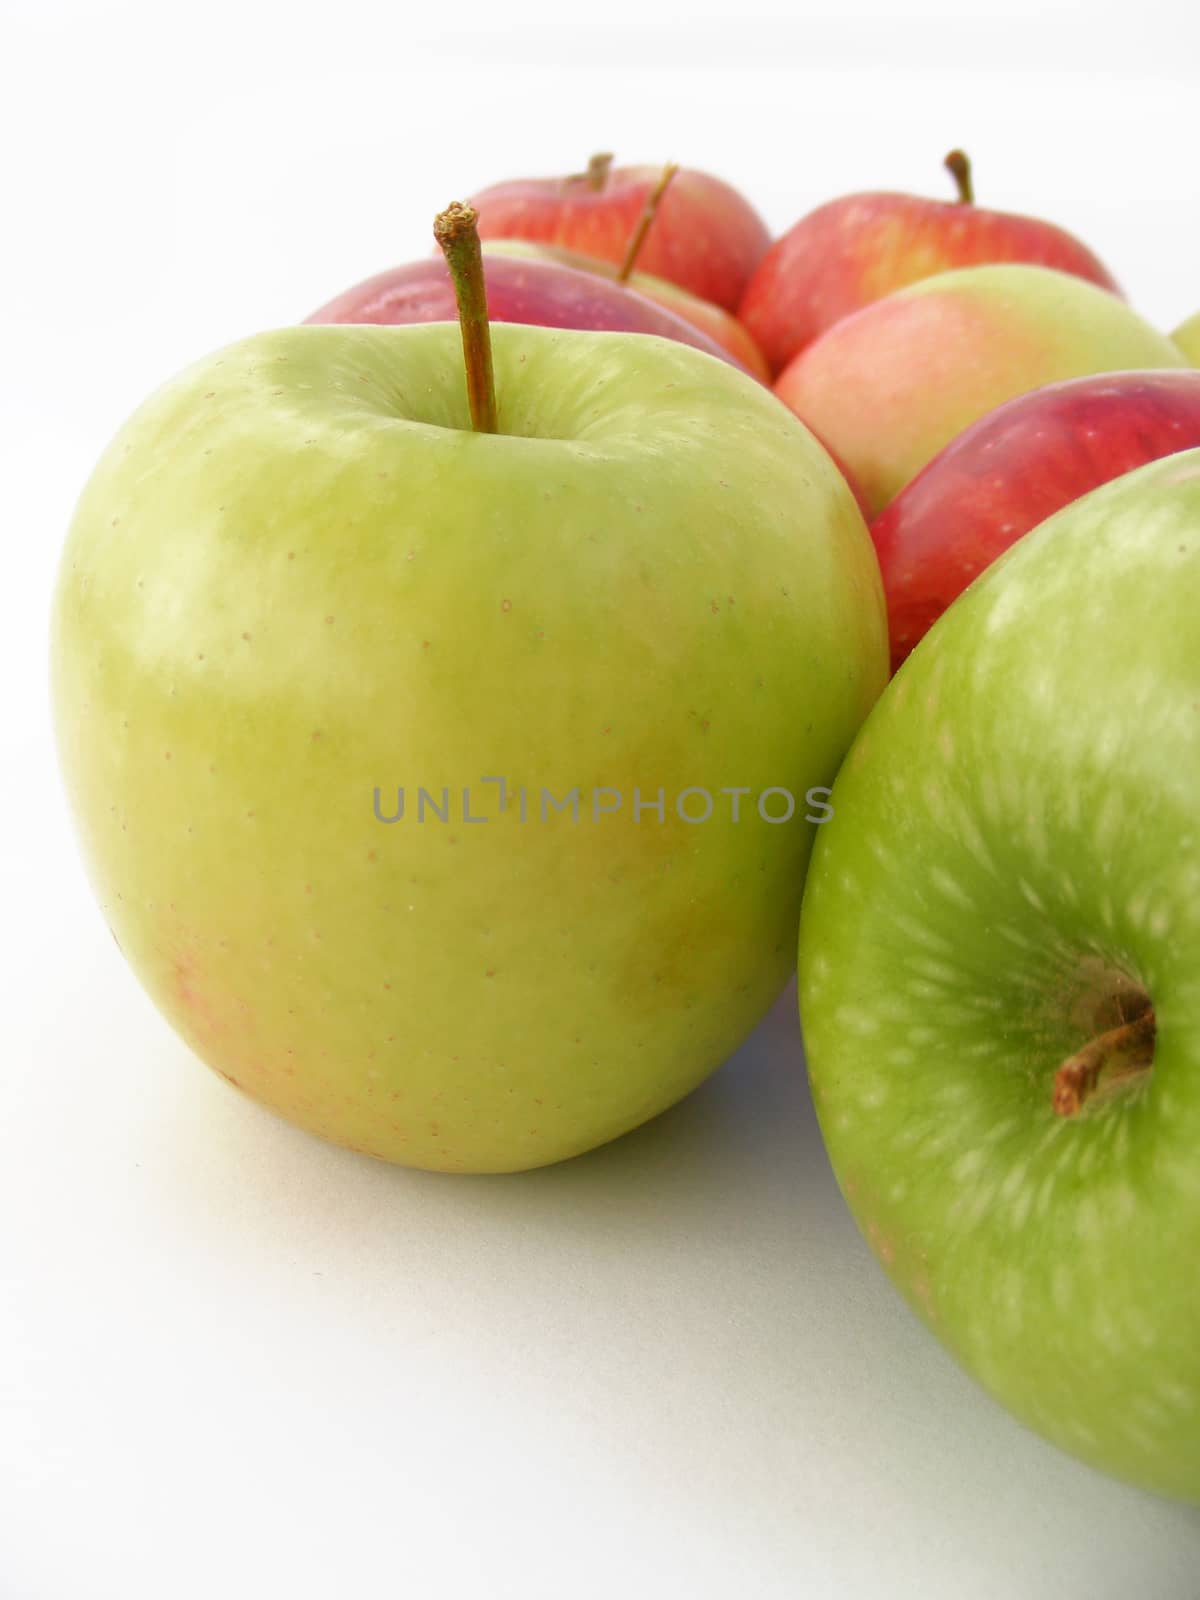 Newest and most beautiful green apple pictures